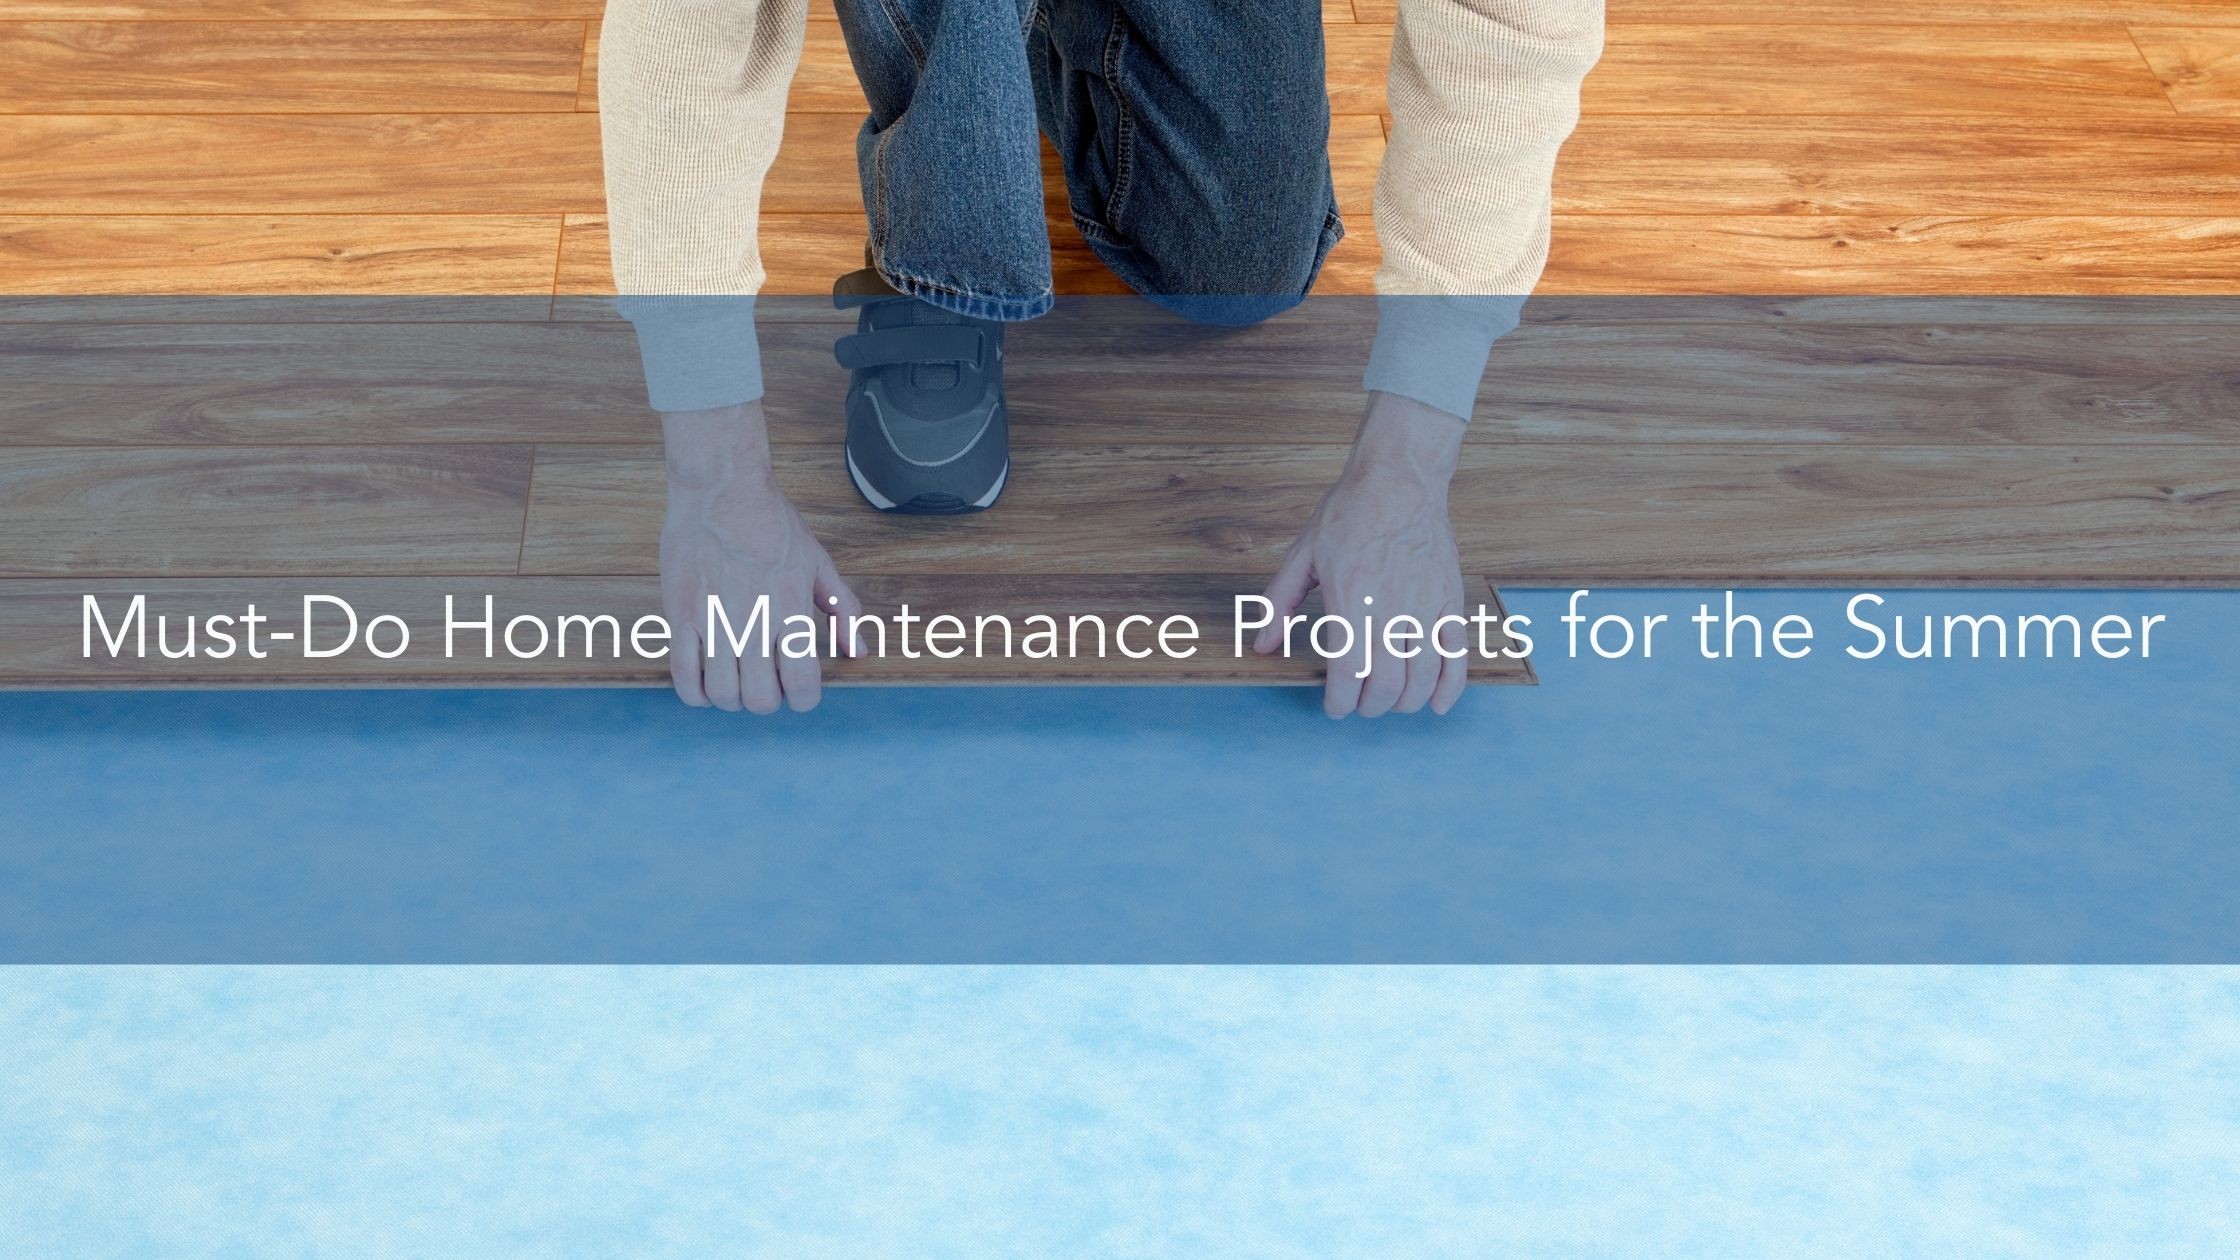 https://handymanconnection.com/wp-content/uploads/2022/07/Must-Do-Home-Maintenance-Projects-for-the-Summer.jpg